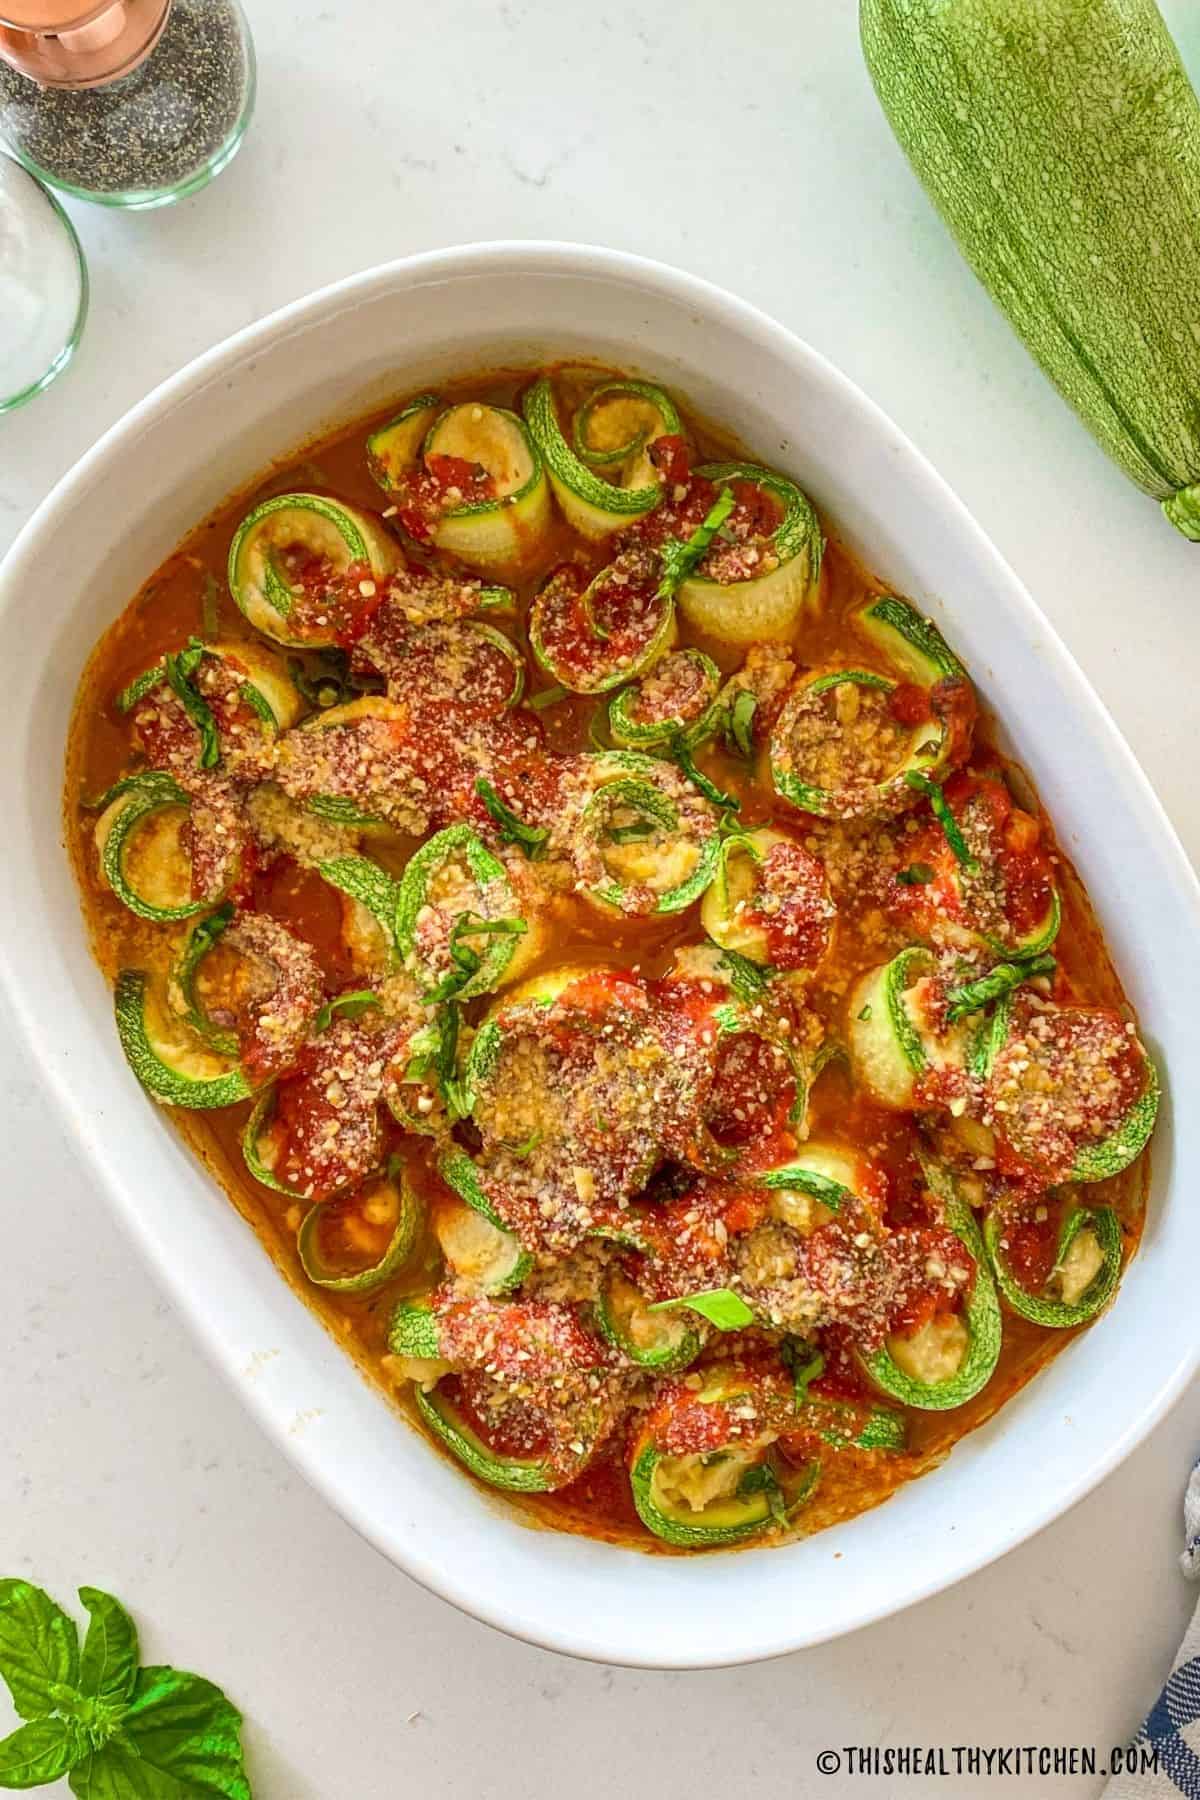 Large baking dish filled with cooked zucchini rolled up with ricotta cheese inside.